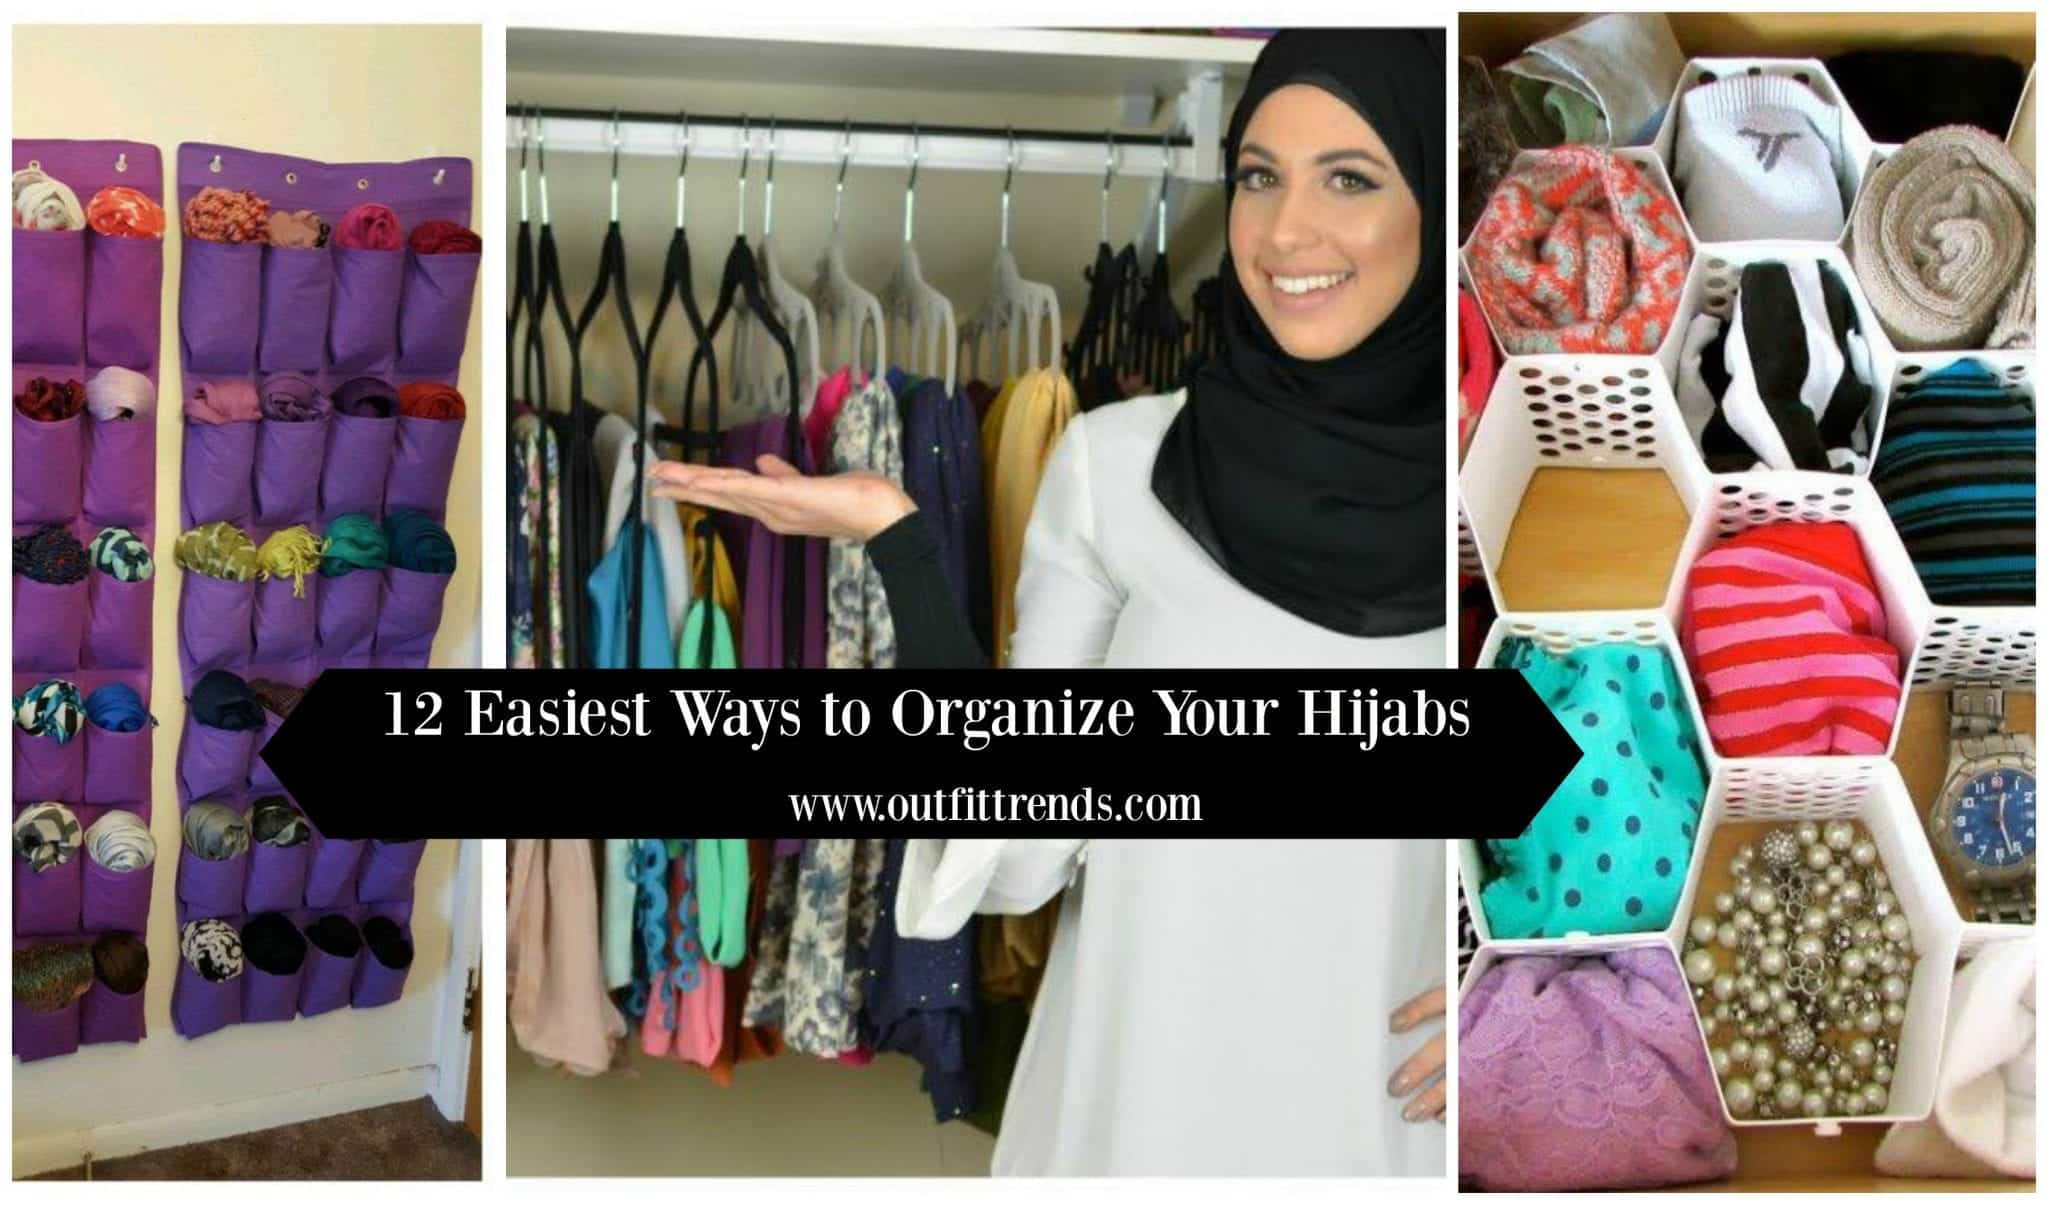 Here Are 5 Ways To Easily Organise Your Hijabs For Under $10!